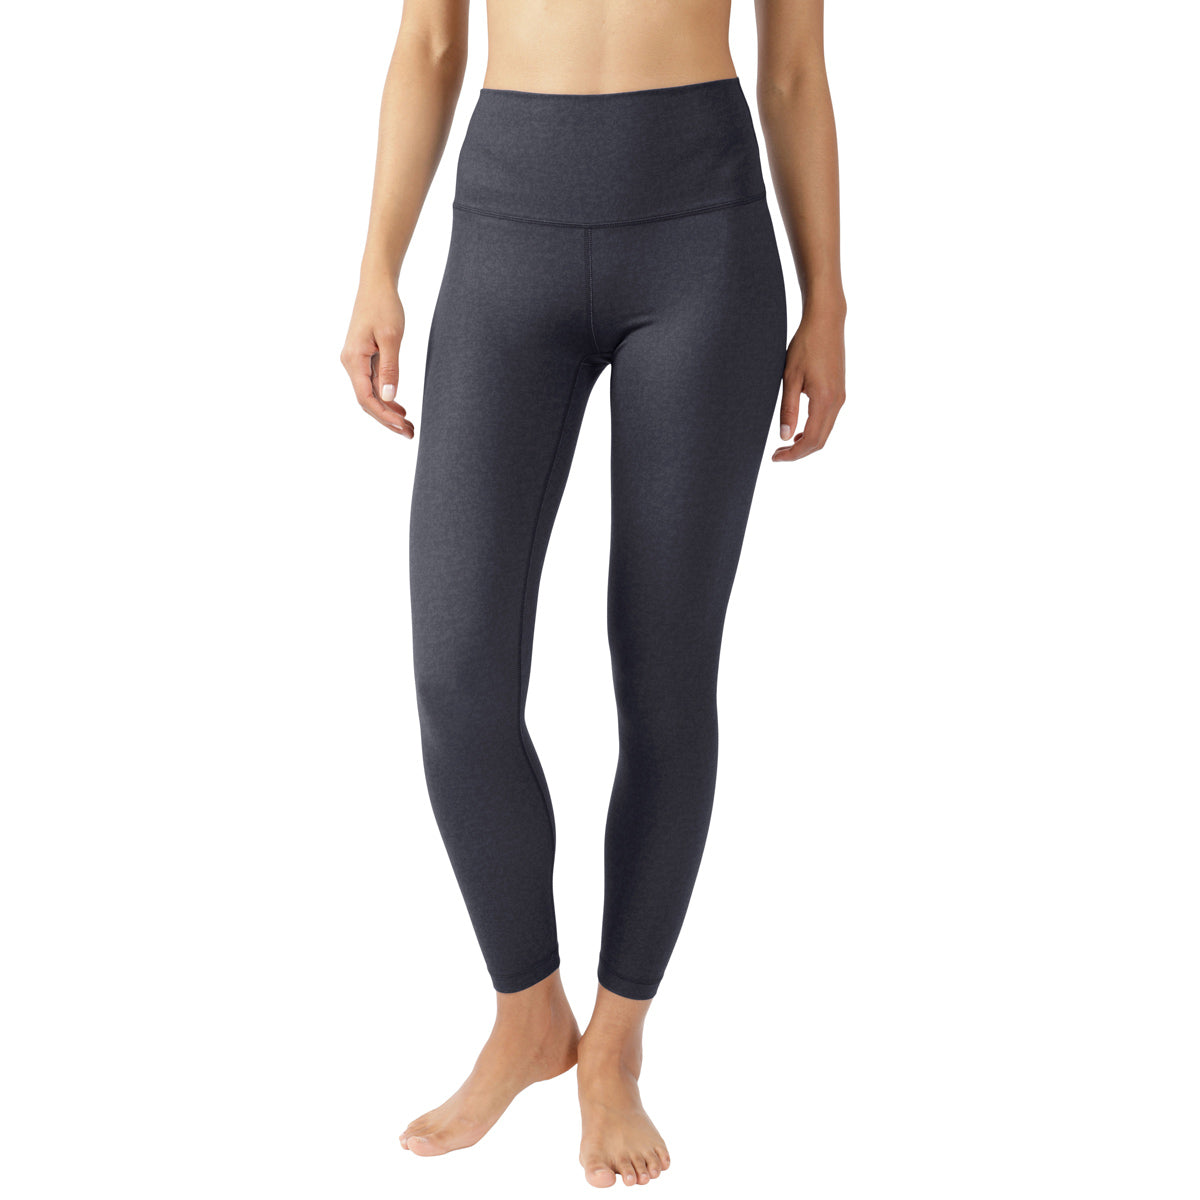 90 Degree By Reflex Lace Active Pants, Tights & Leggings